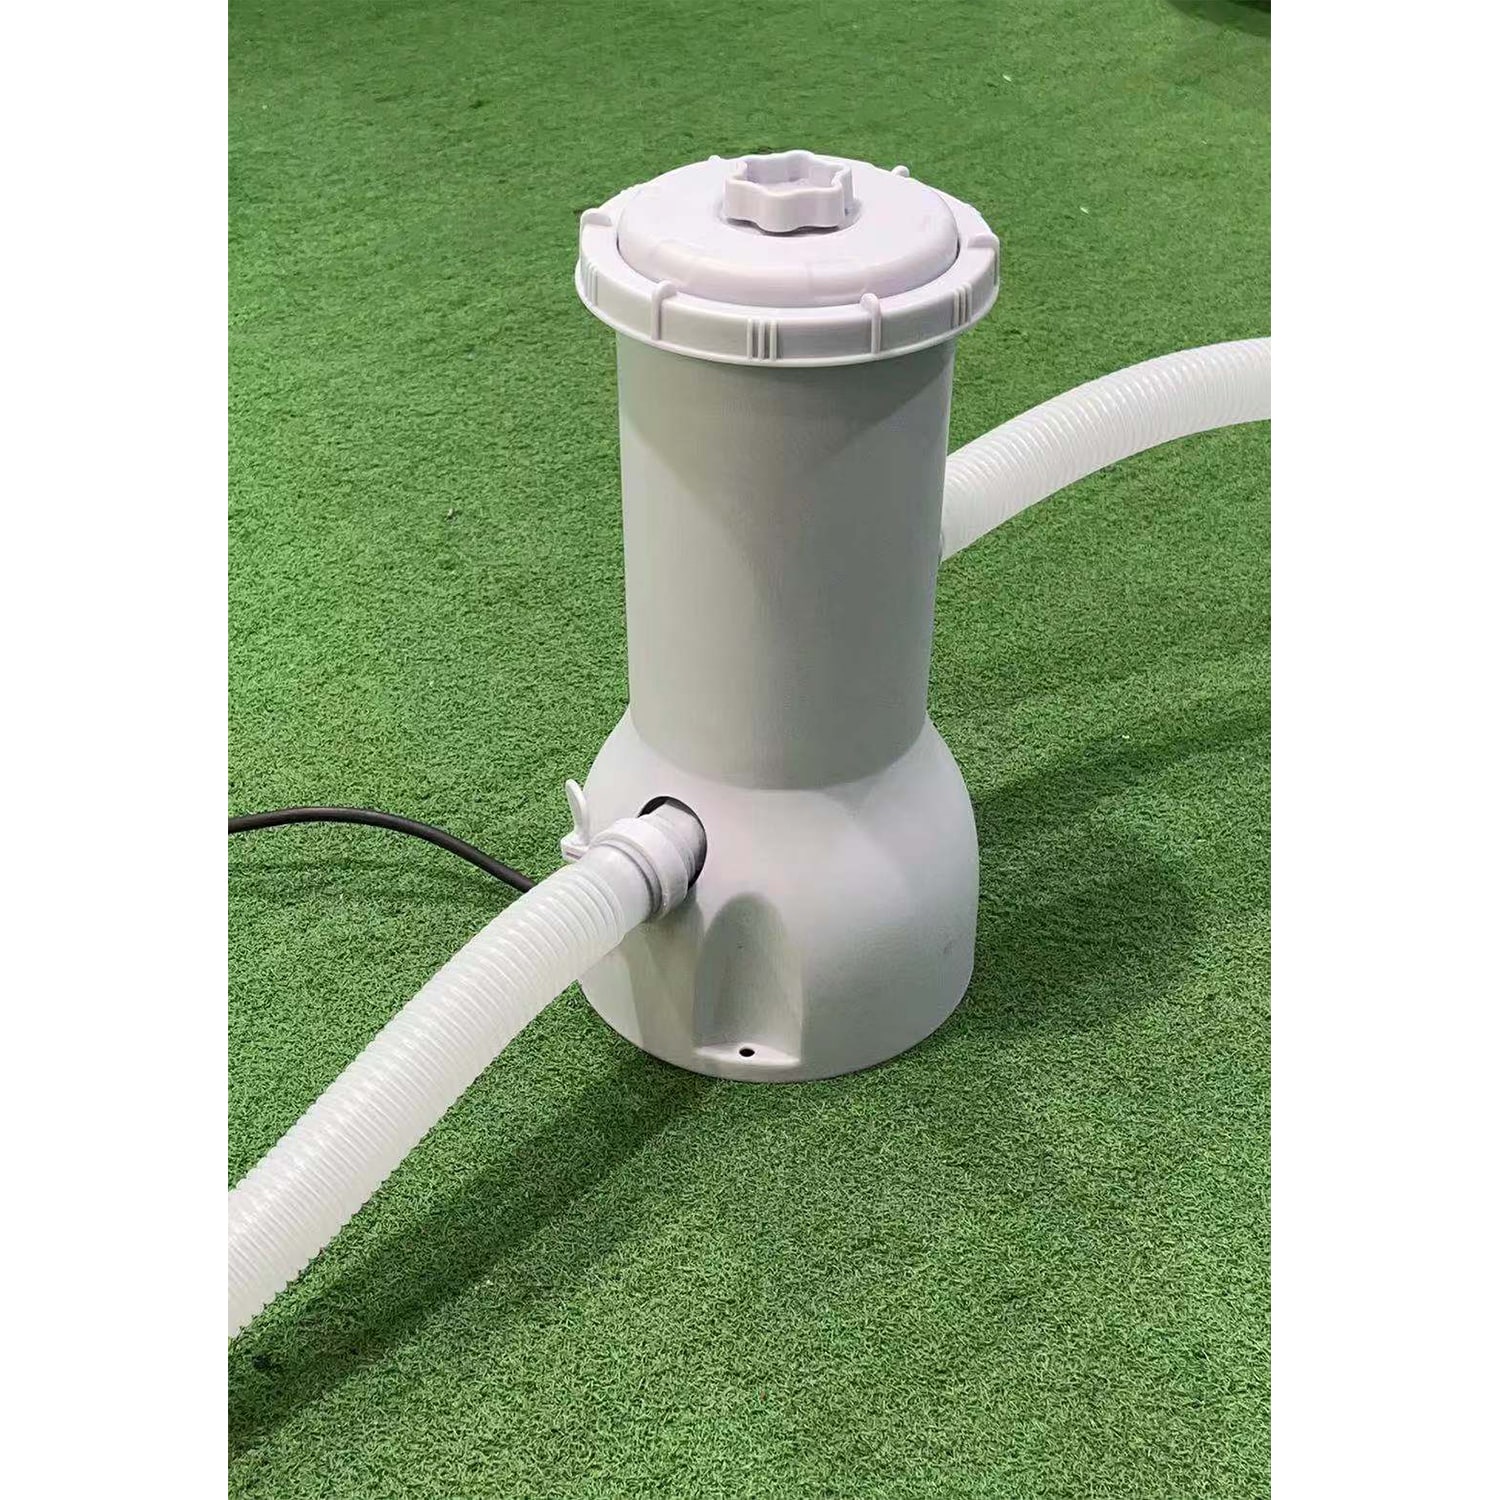 Jleisure Clean Plus 800 GPH Above Ground Swimming Pool Filter Cartridge Pump for sale online 